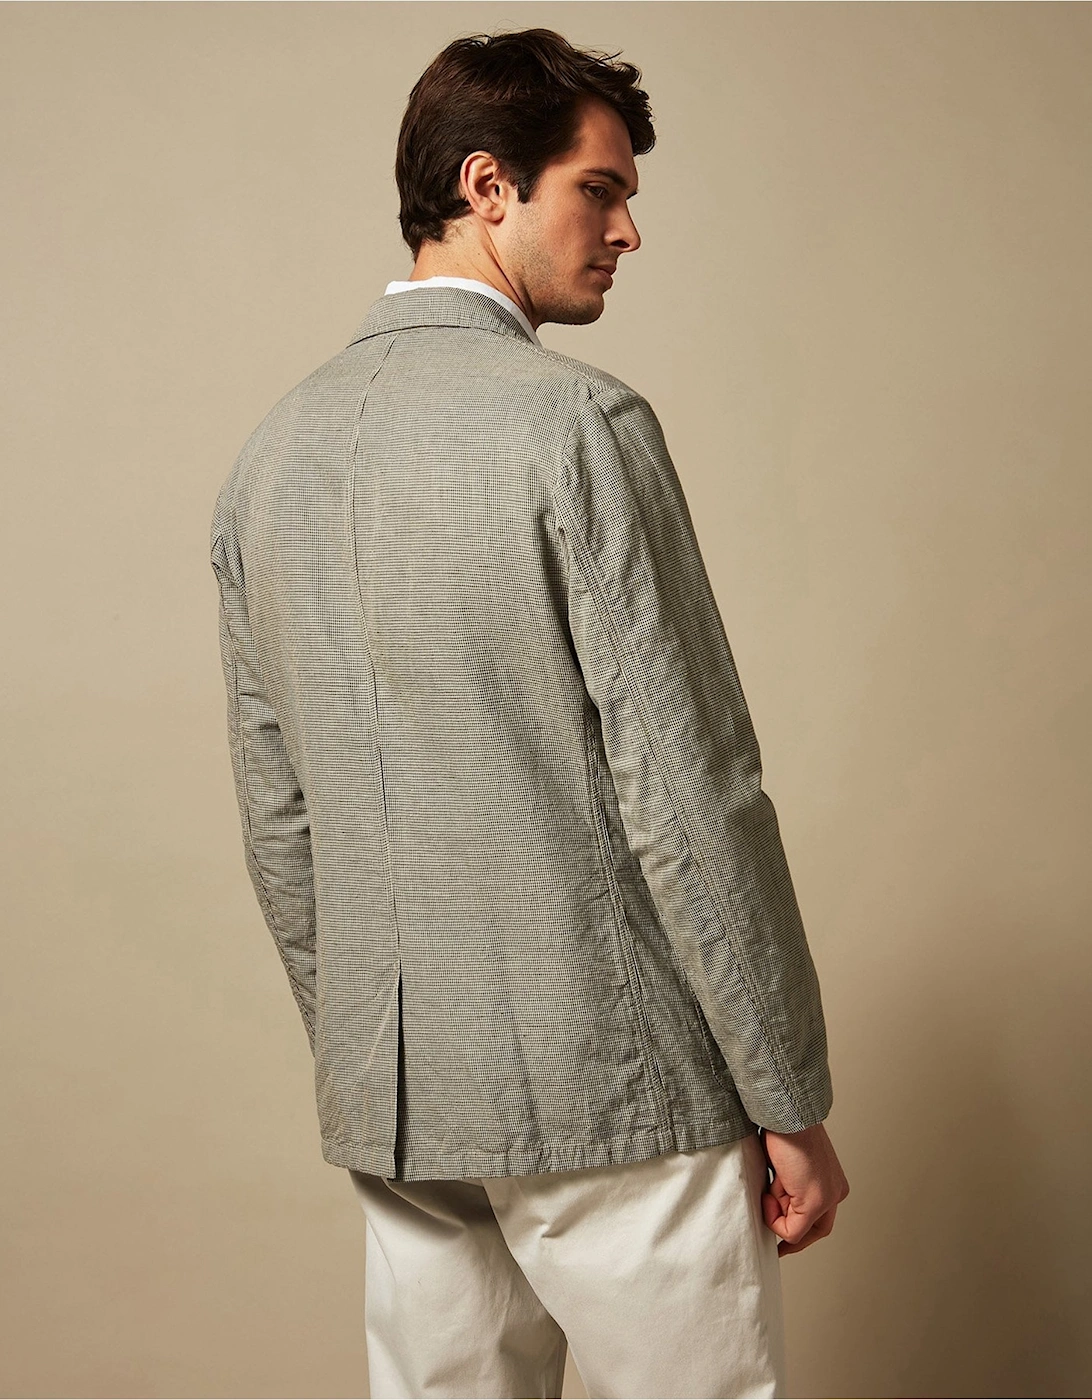 Cotton Linen Houndstooth Jetty Jacket